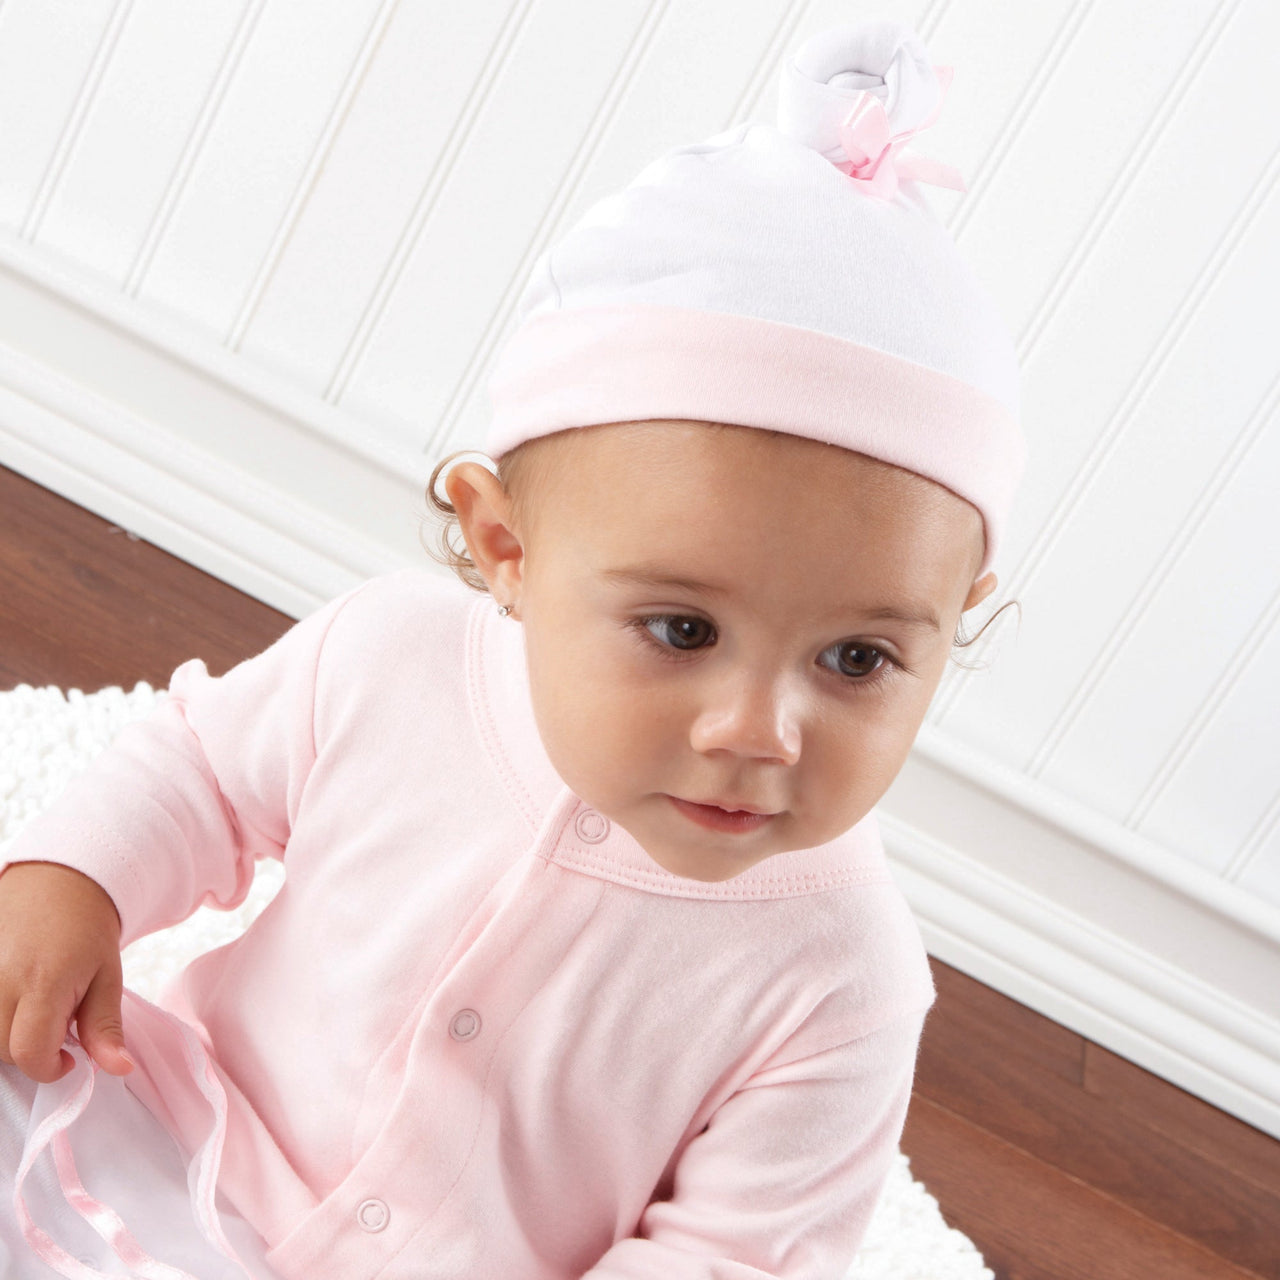 Big Dreamzzz Baby Ballerina 2-Piece Layette Set  (Personalization Available)